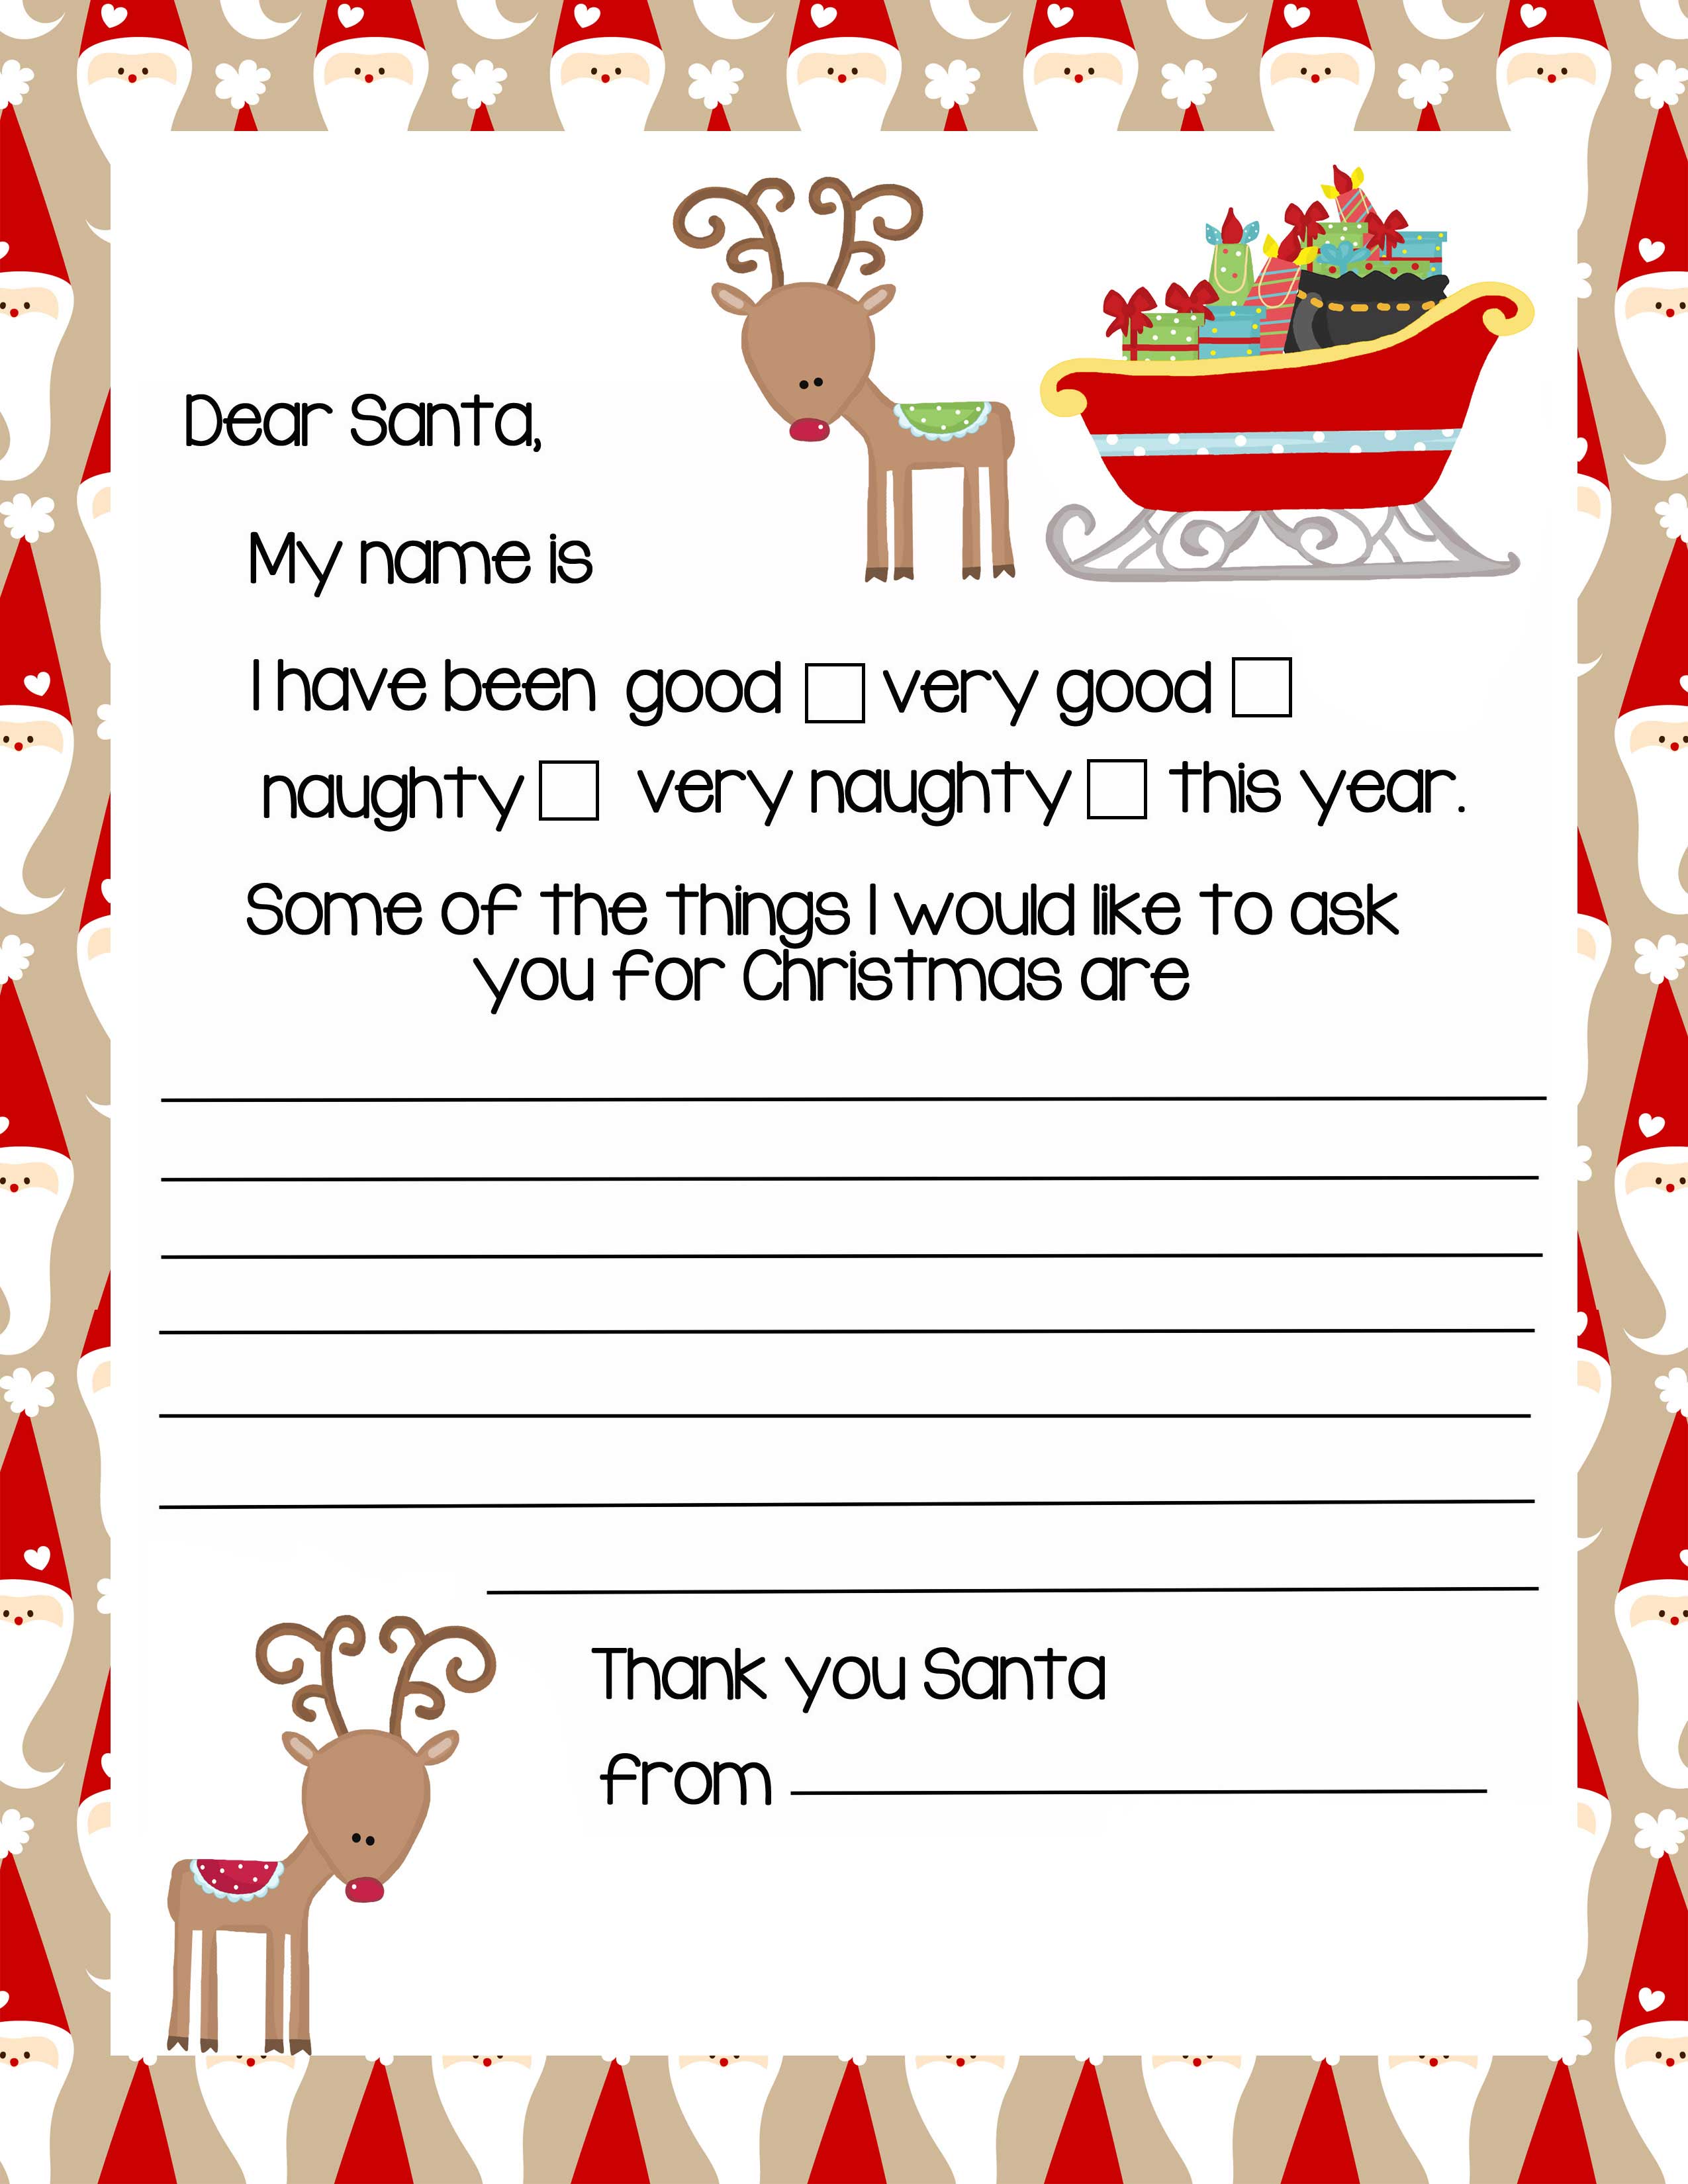 letter-to-santa-claus-wallpapers-high-quality-download-free